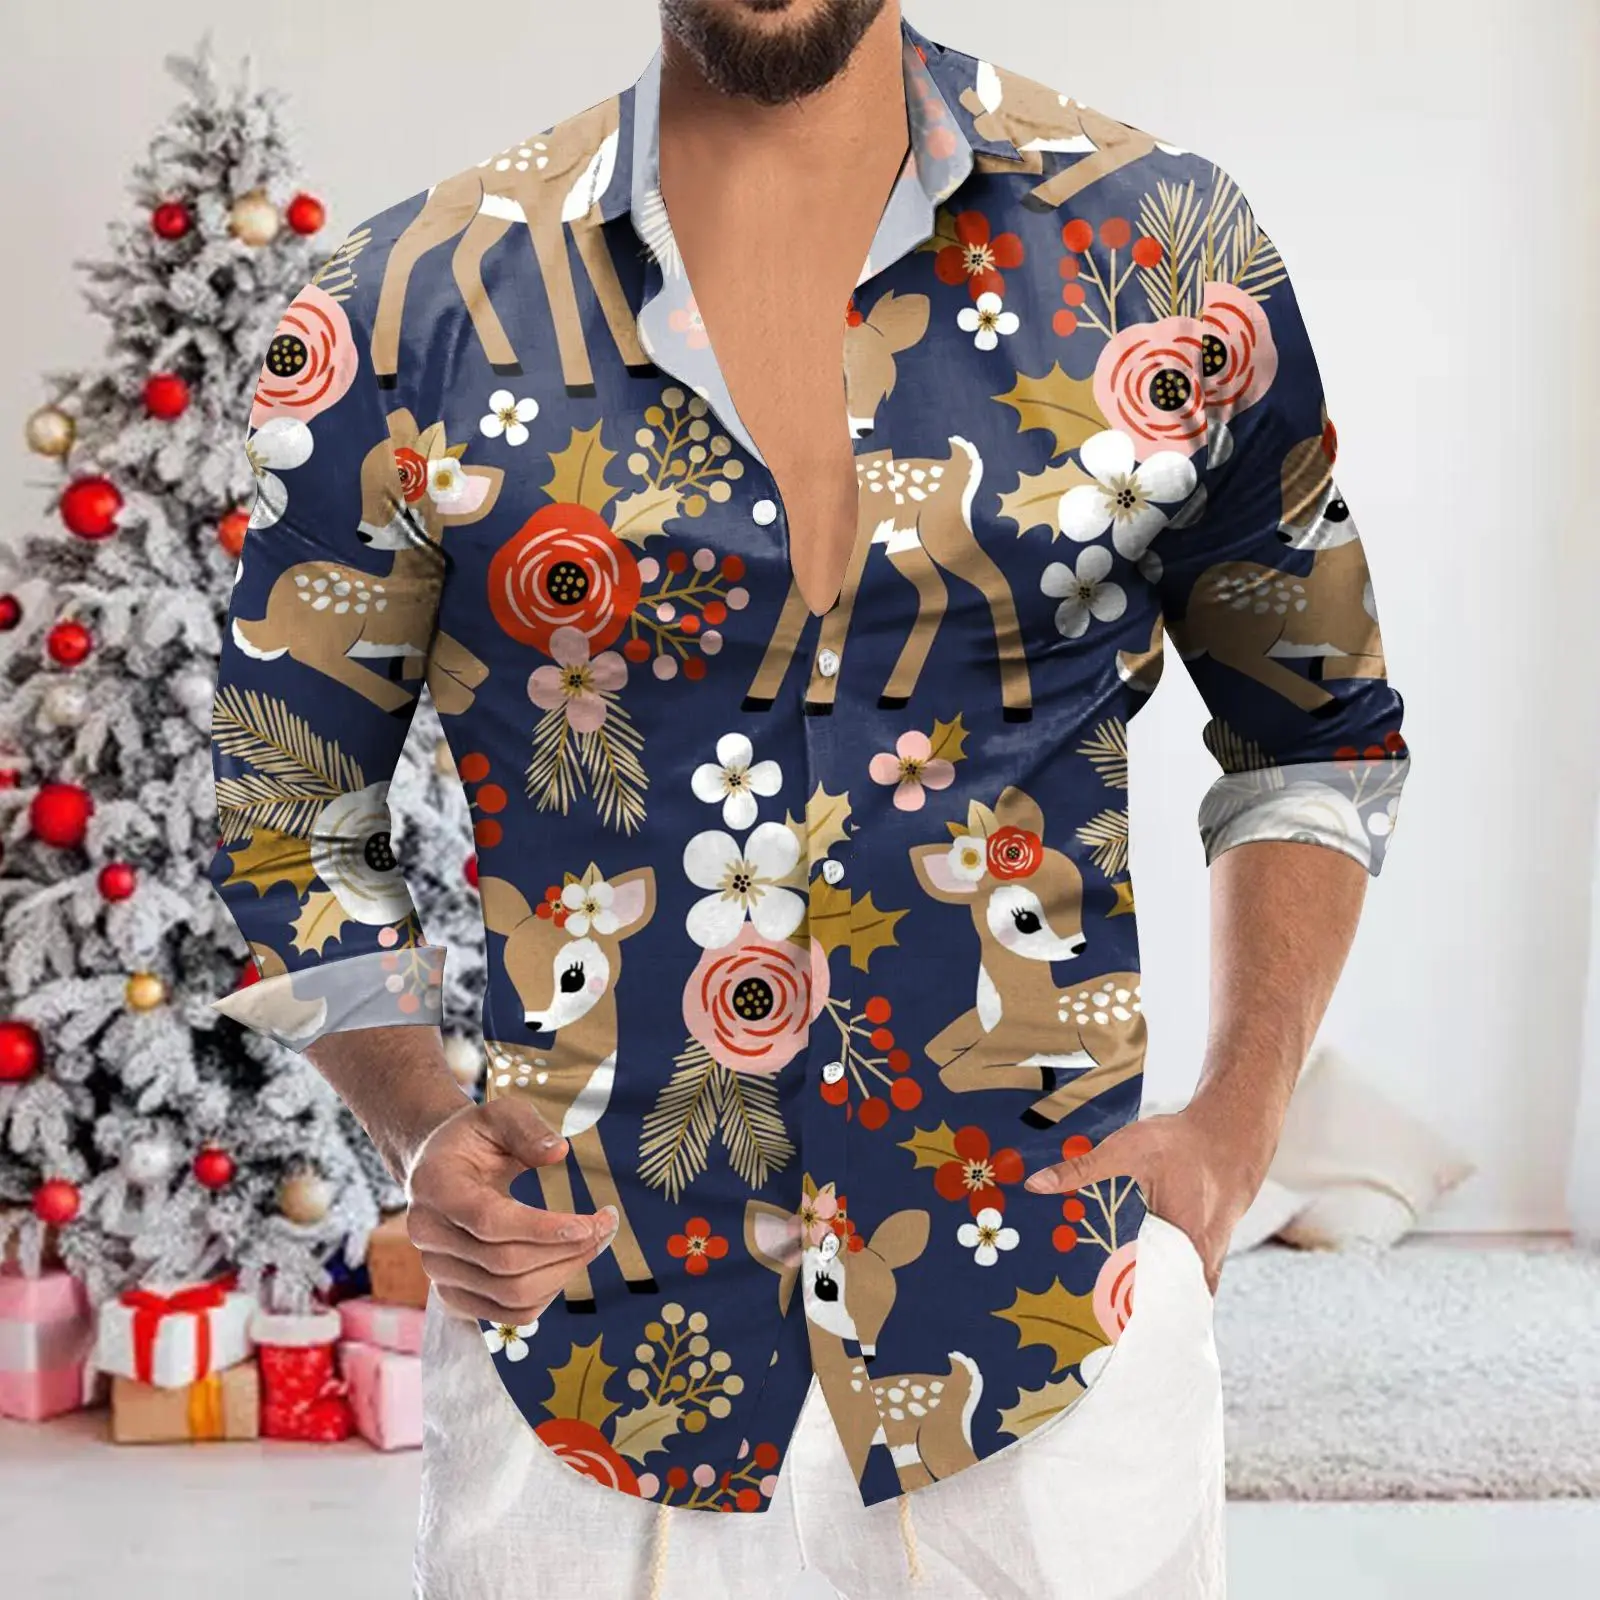 Snowman Print Men's Shirt for Men Fashion Y2k Streetwear Clothes Lapel Smooth Long Sleeve Tops Merry Christmas Party Blouse New